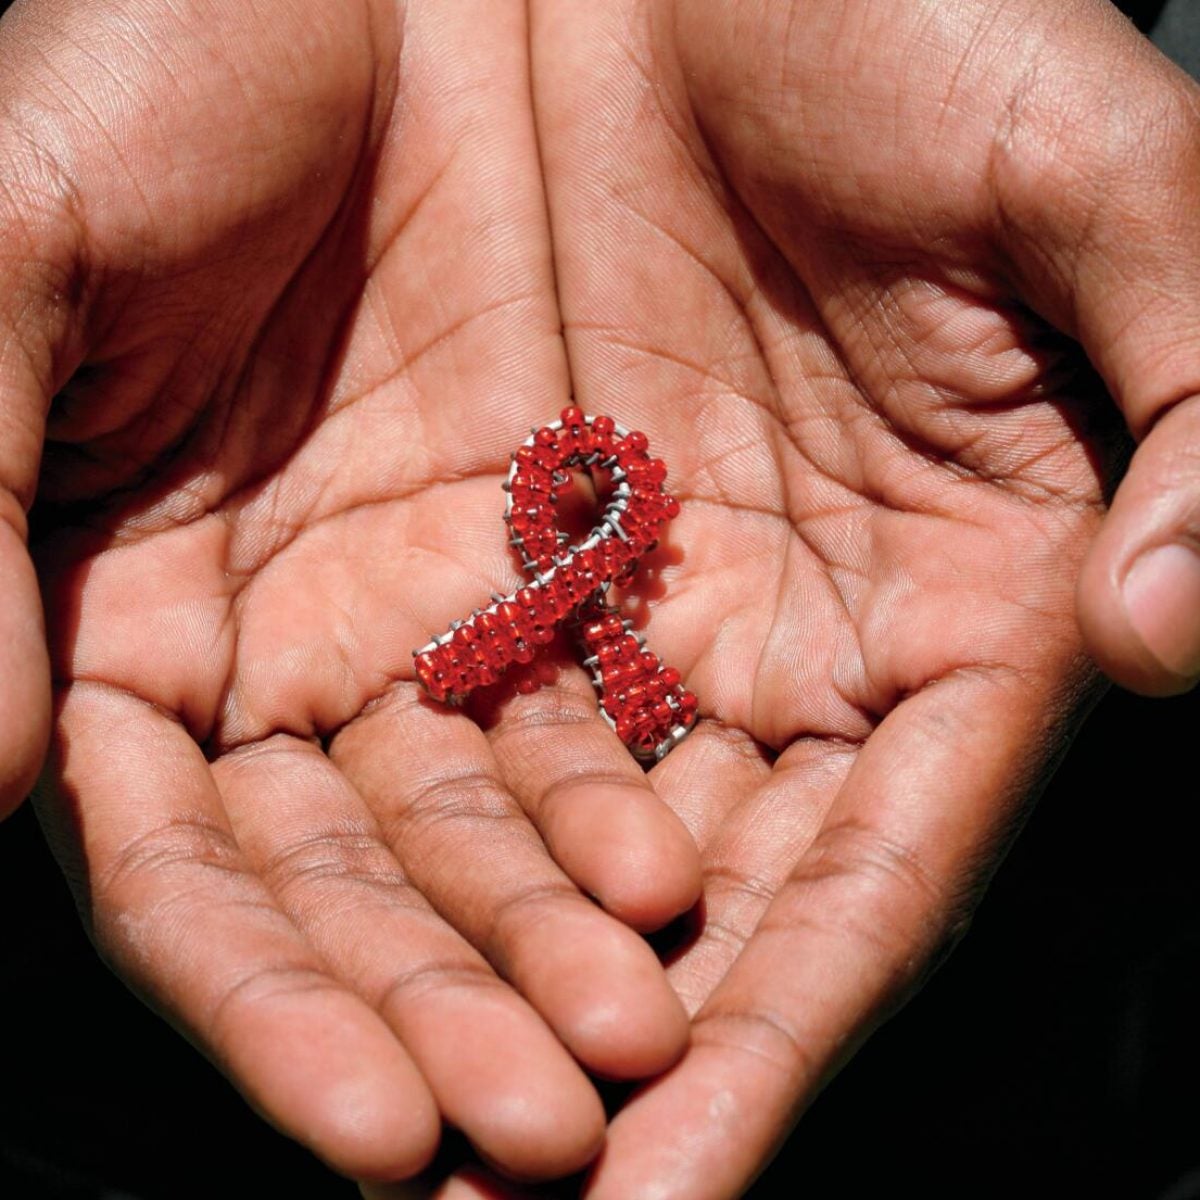 Knowledge Is Power: What Black People Need To Know About HIV/AIDS Right Now